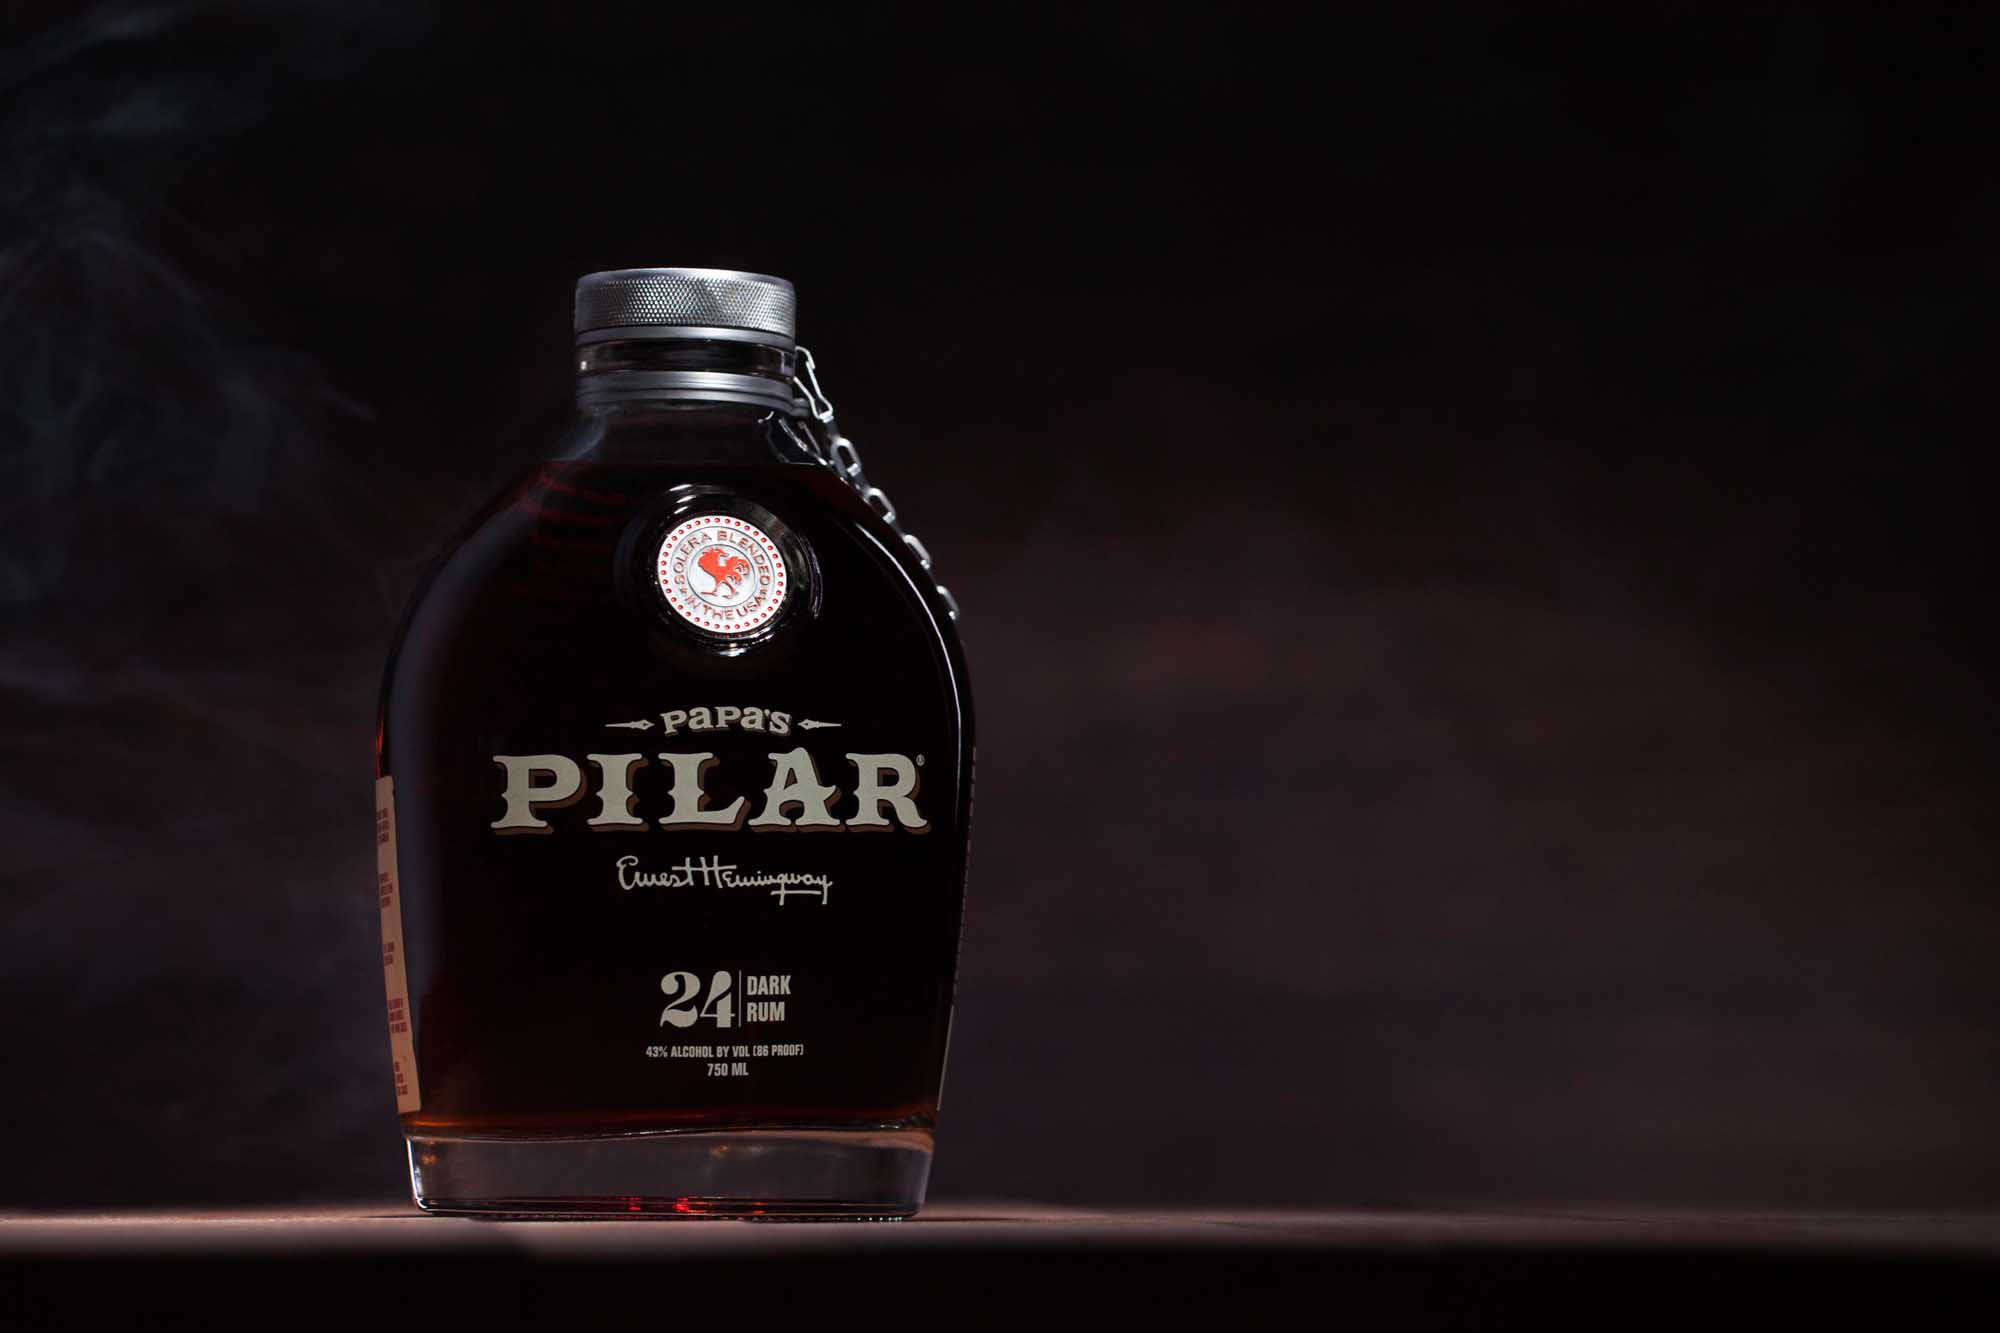 Papa's Pilar Rum bottle on table and dark background | product photography | Bottle Photography  | Still Life Photography shot in Boulder, Colorado for Crispin Porter + Bogusky